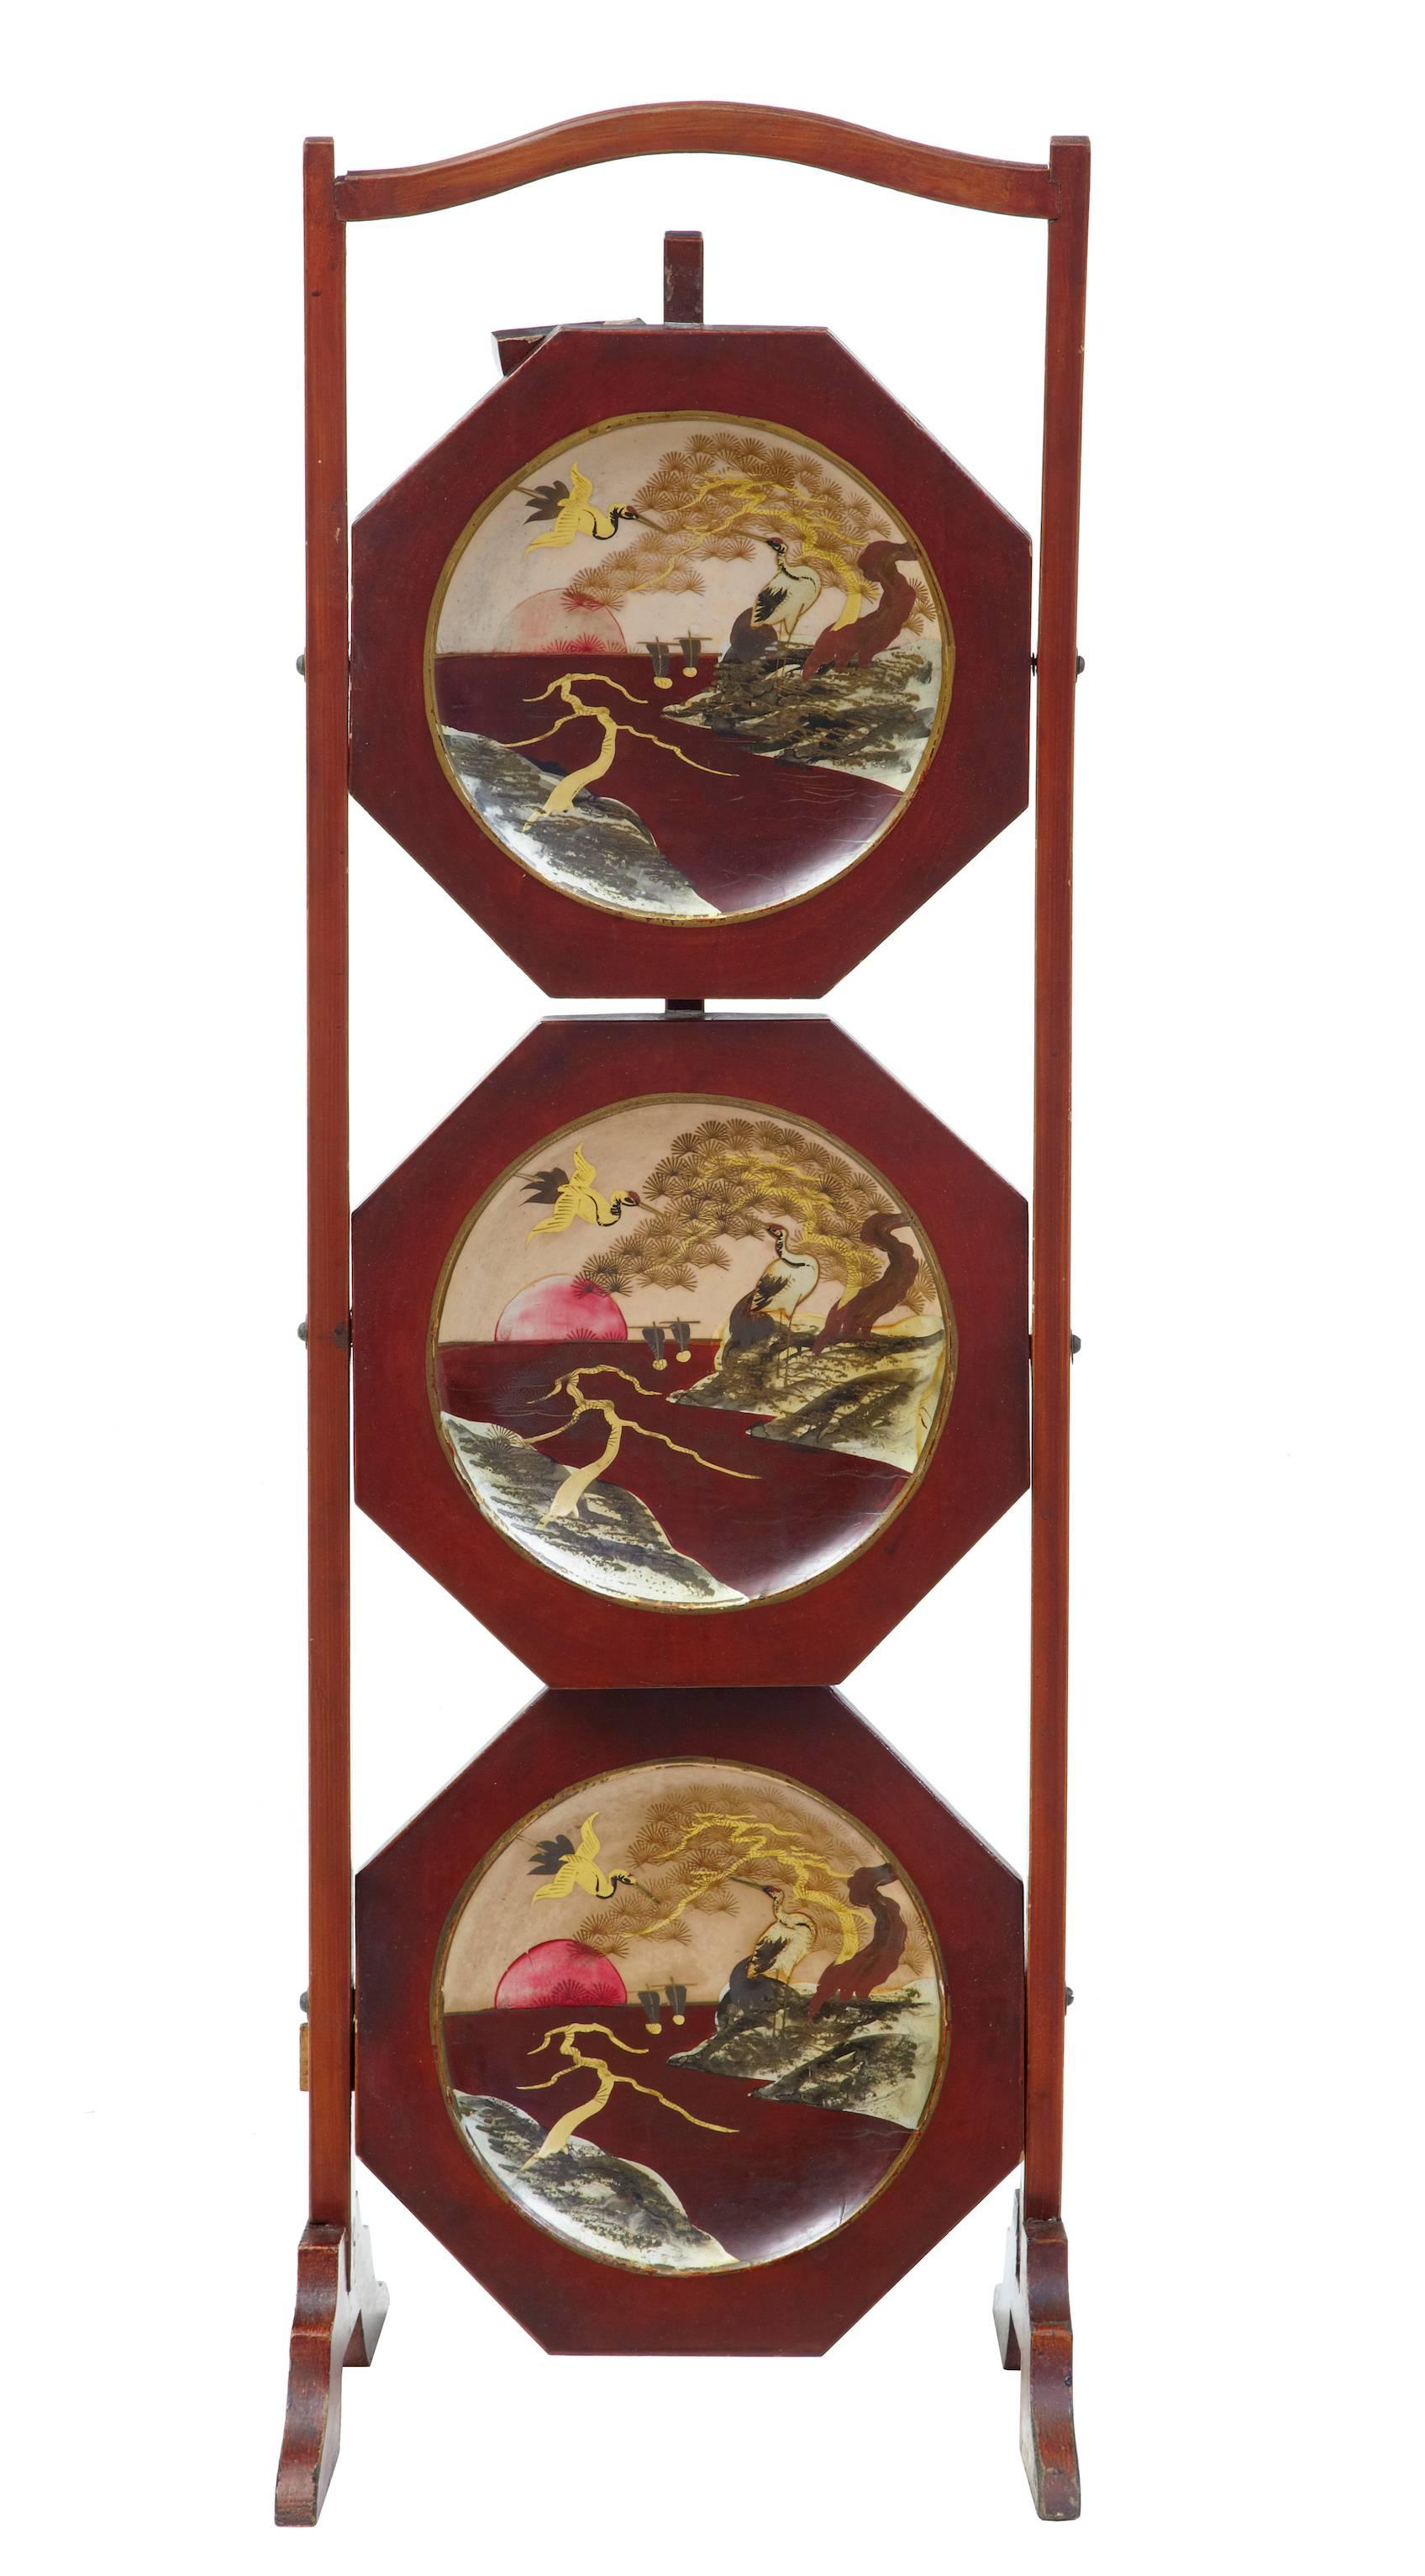 Three-tier cake stand which closes when not in use. Painted scene with herons. Some wear to red lacquer.

Height: 31